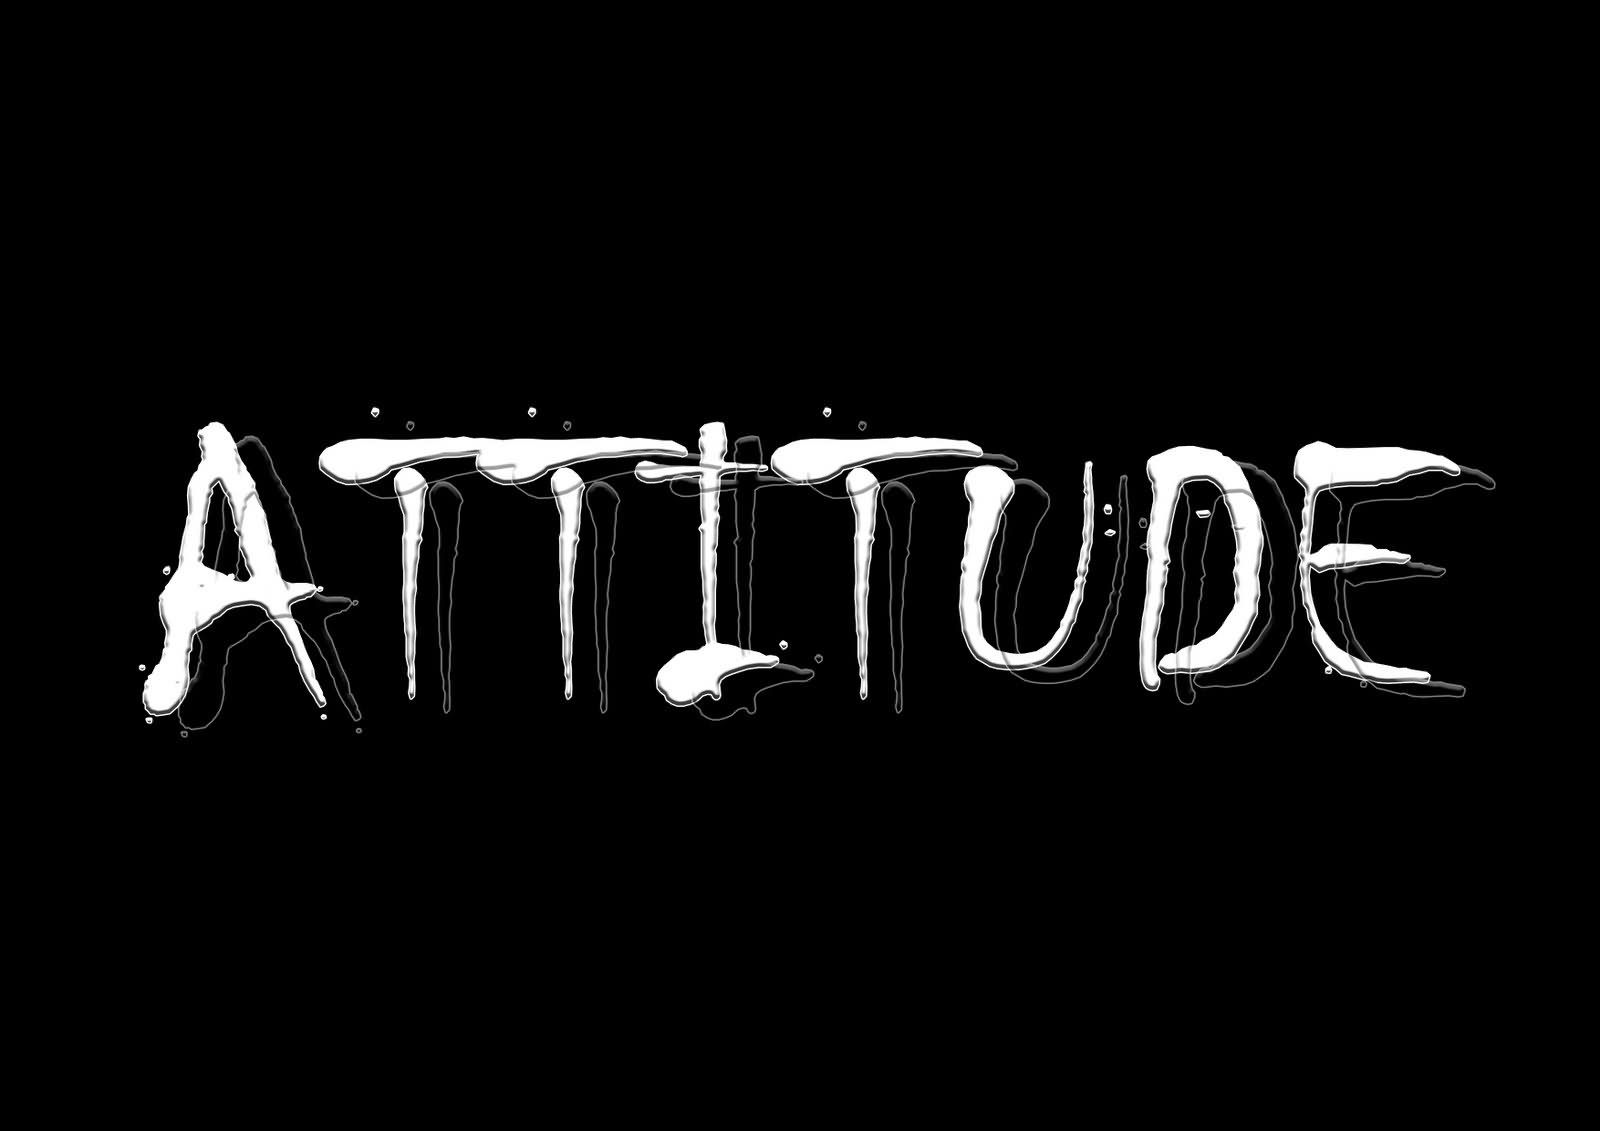 Free download Wallpaper with texts about Attitude [1600x1131]